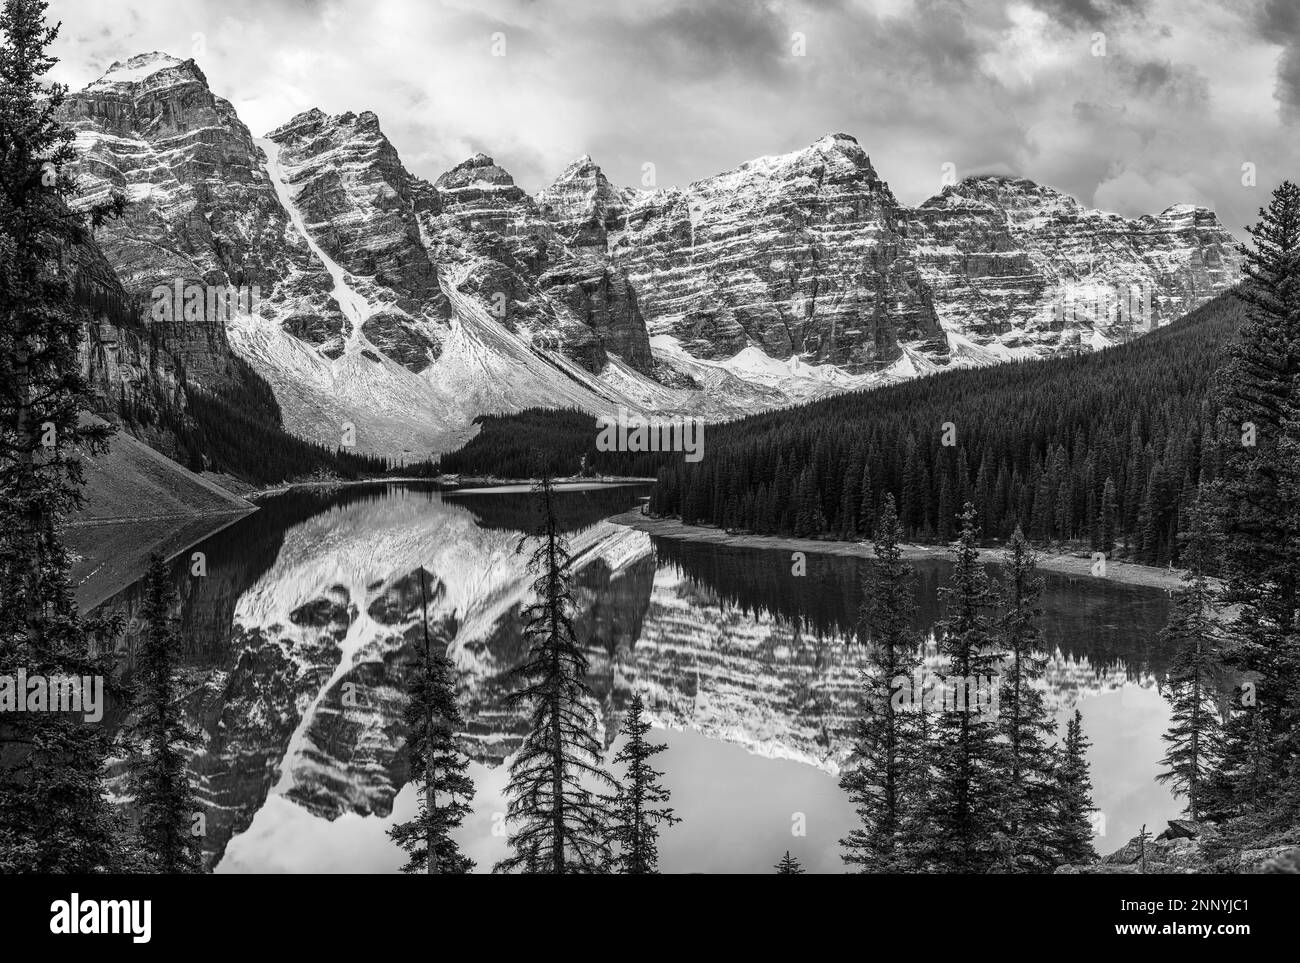 Landscape with lake and mountain range, Moraine Lake, Valley of the Ten Peaks, Alberta, Canada Stock Photo